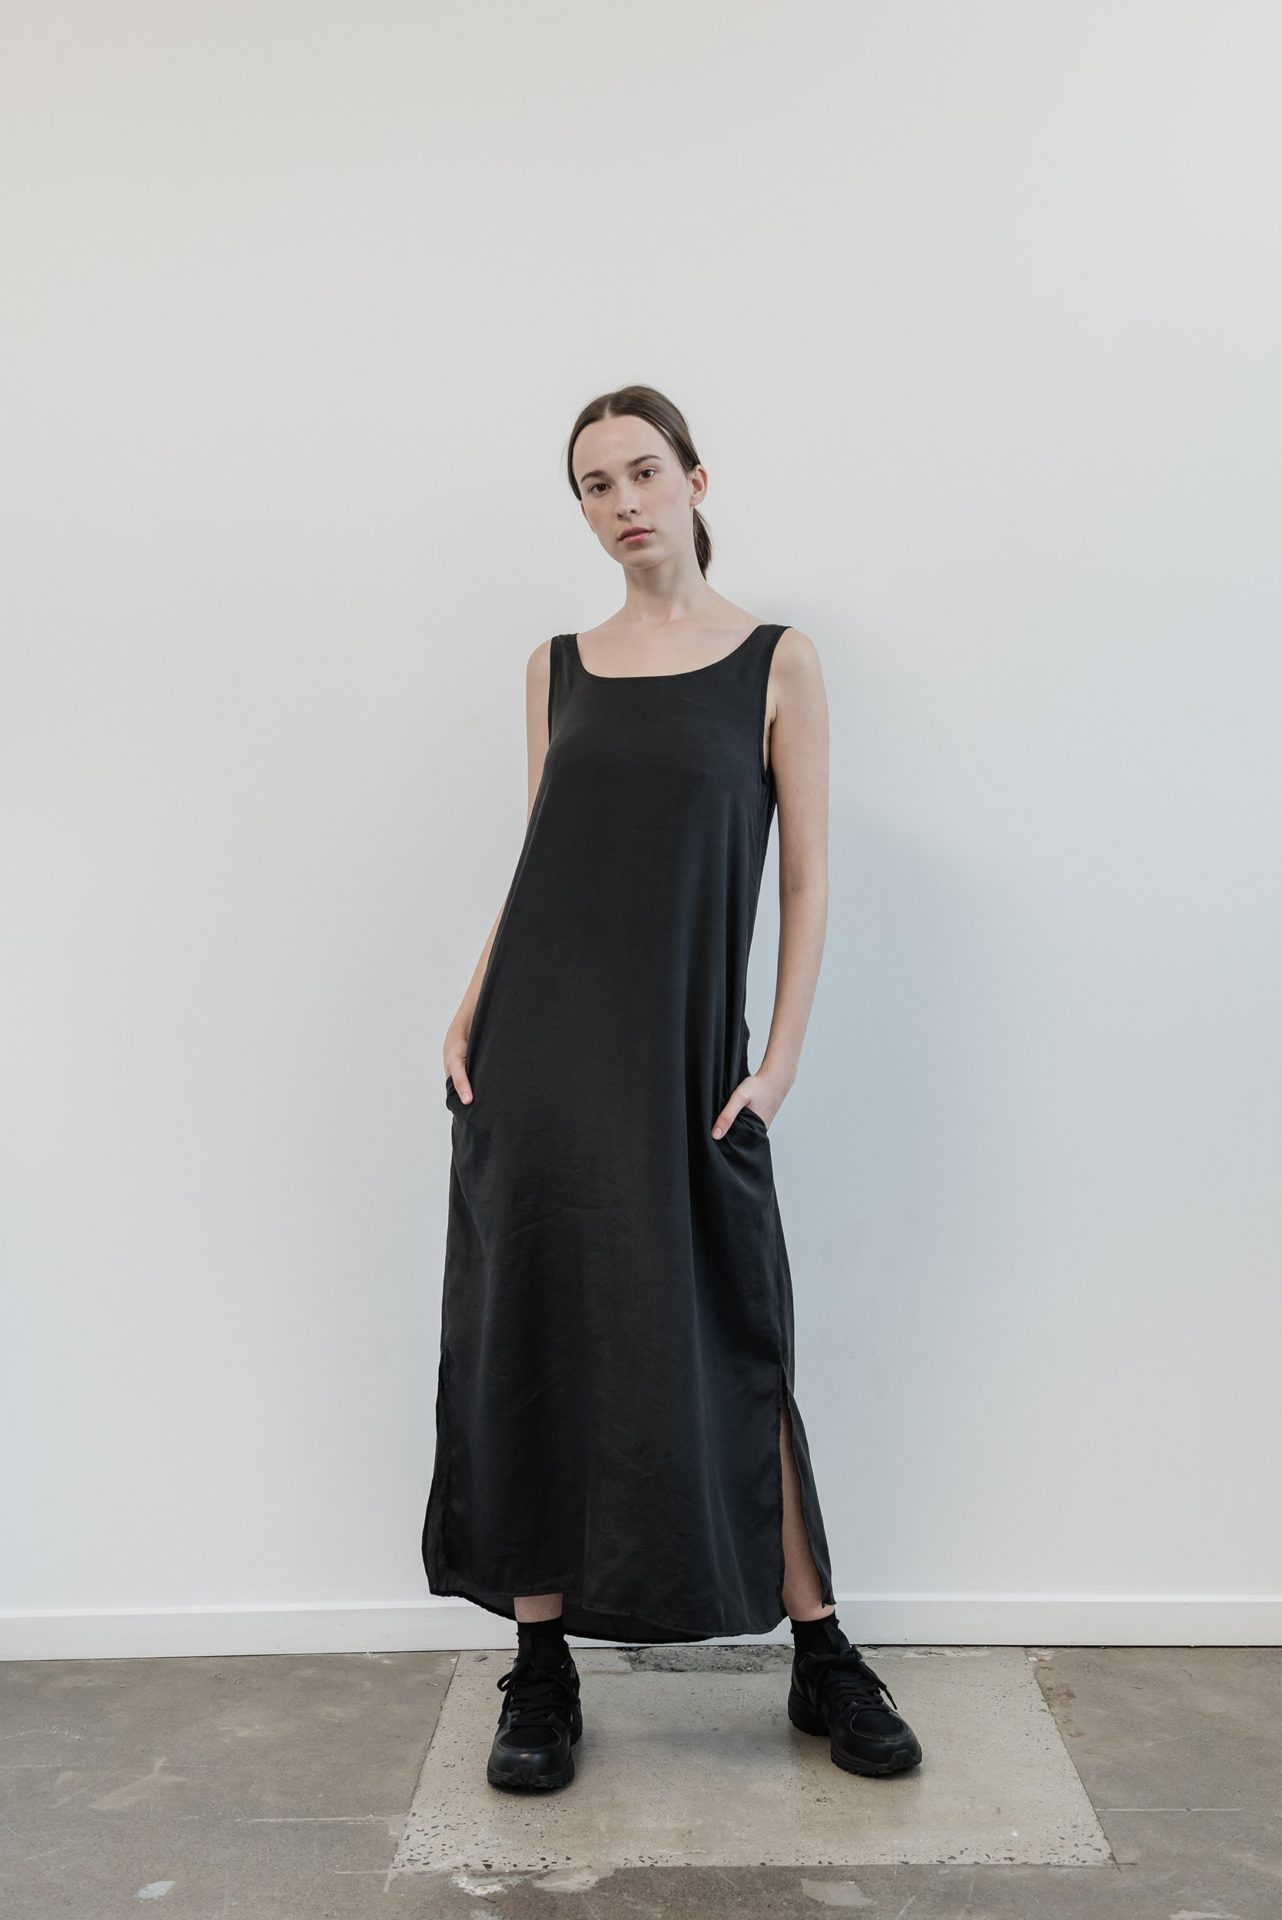 A.BCH, the Fashion Label Built Upon a Circular Economy